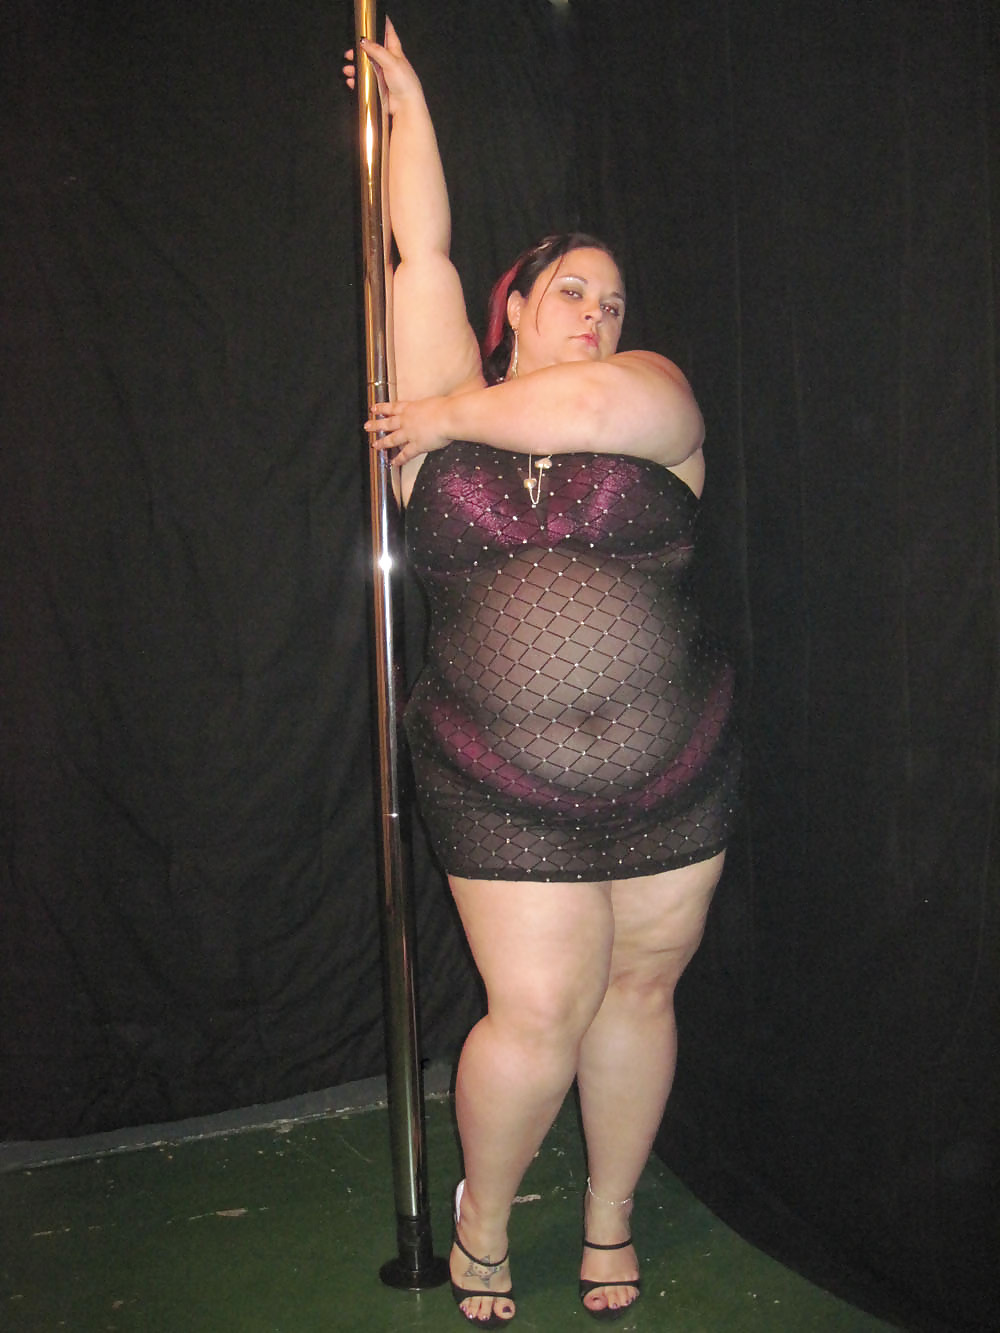 This BBW takes it all off with the help of a stripper pole. 